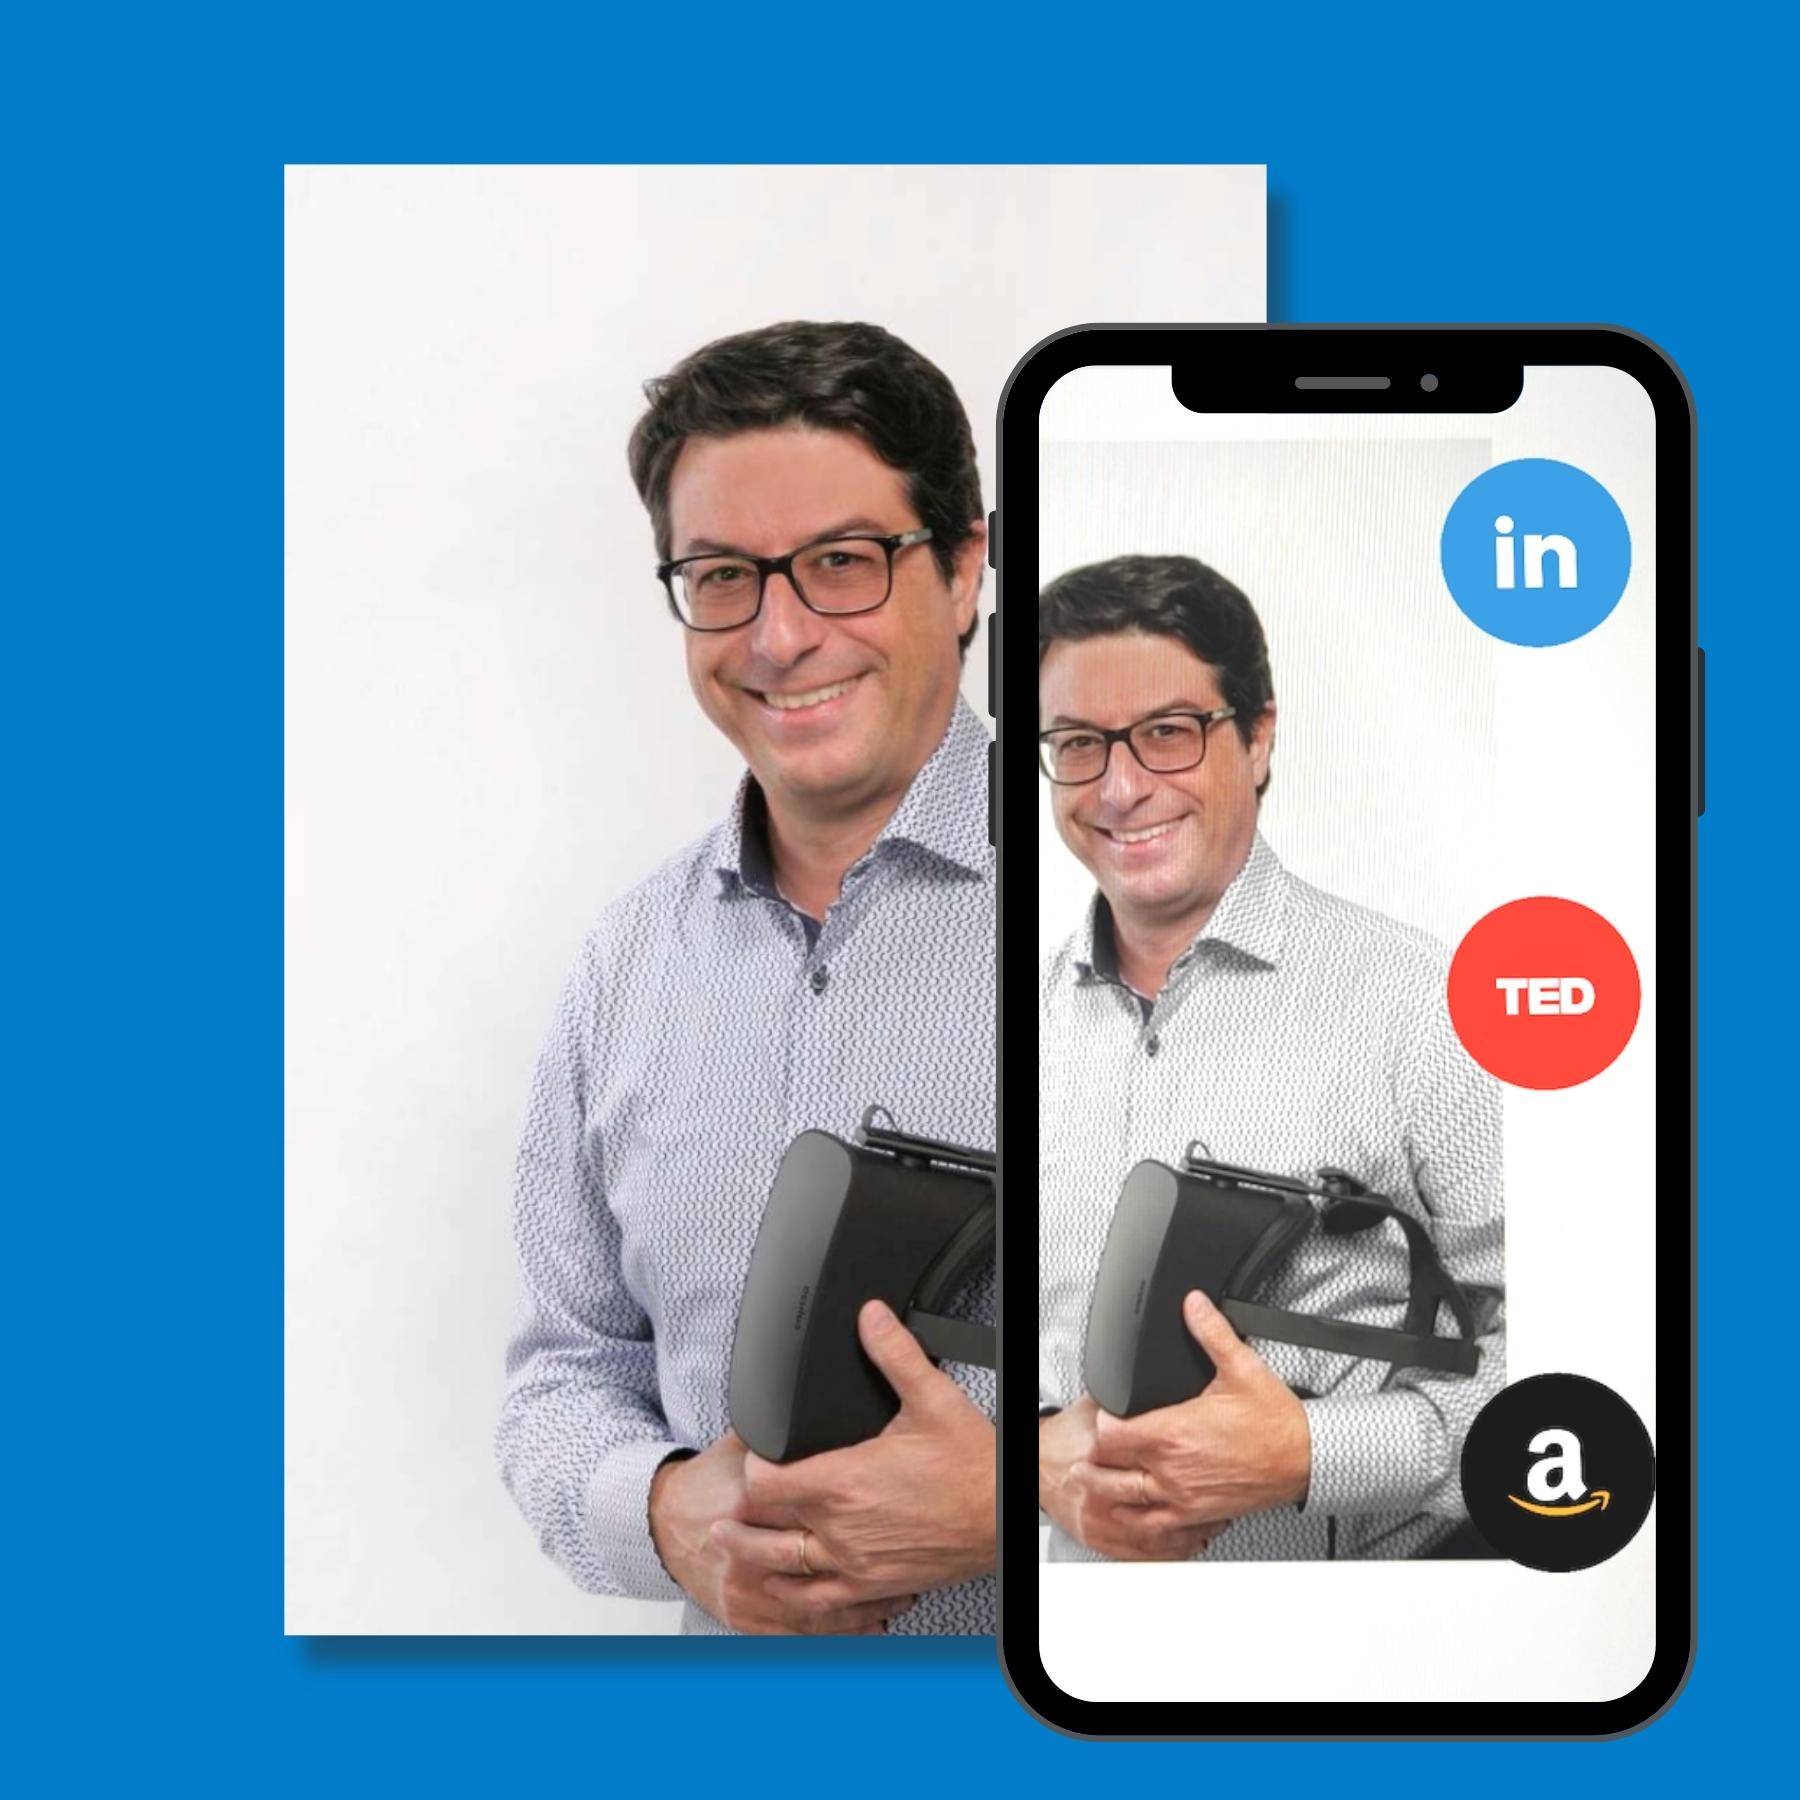 AR for personal branding